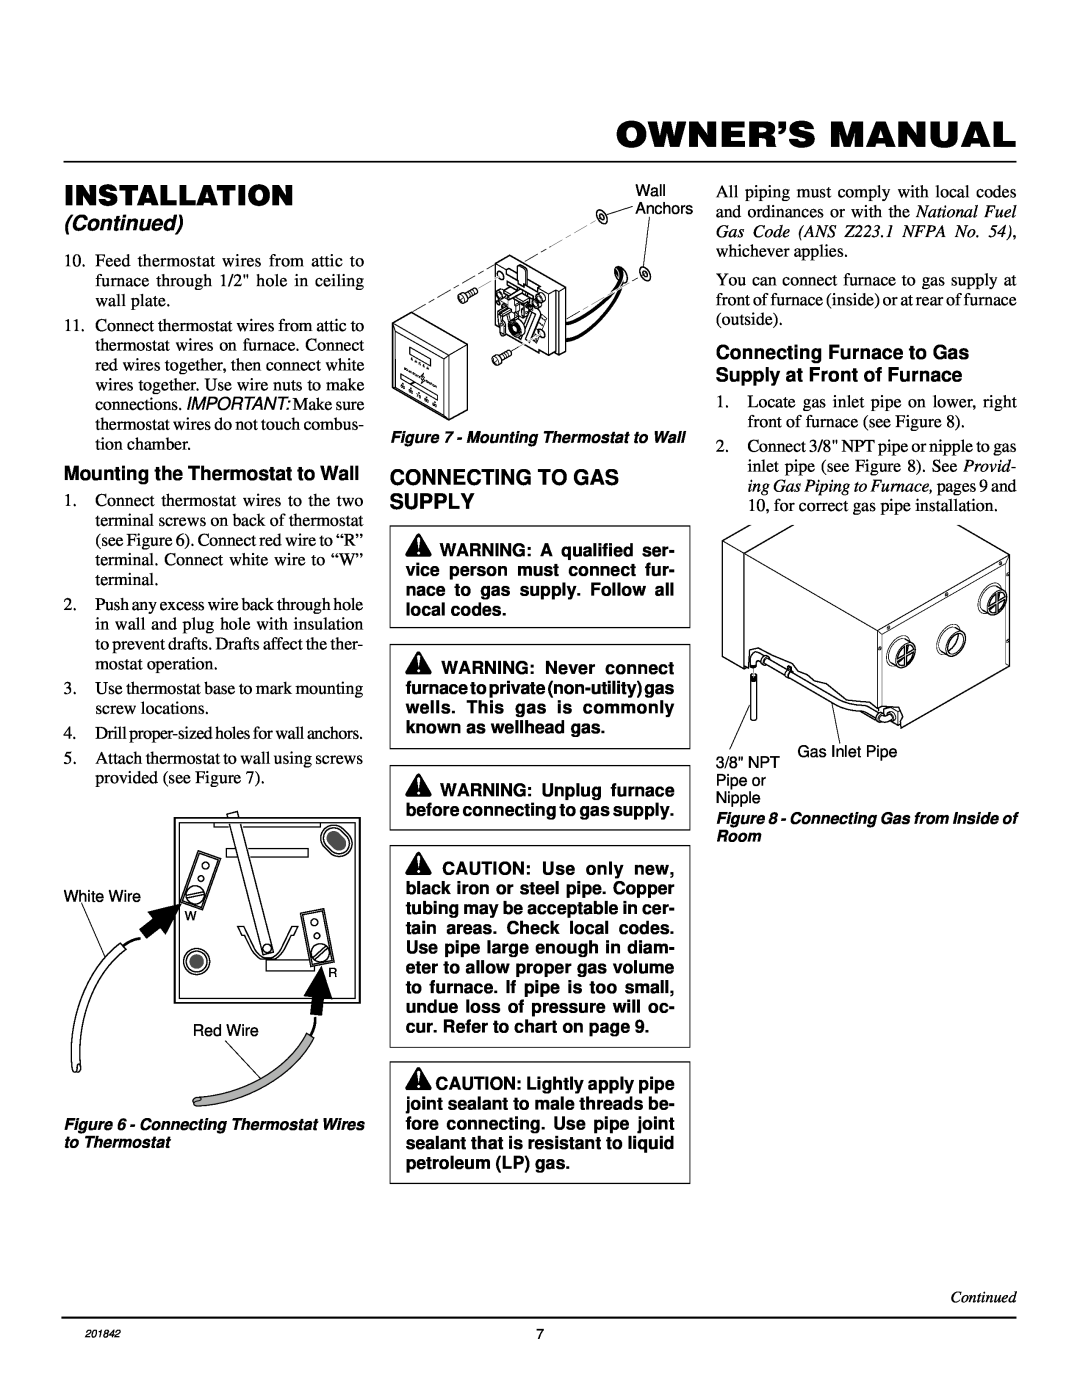 Williams 4003532 Owner’S Manual, Installation, Continued, Connecting To Gas Supply, Mounting the Thermostat to Wall 